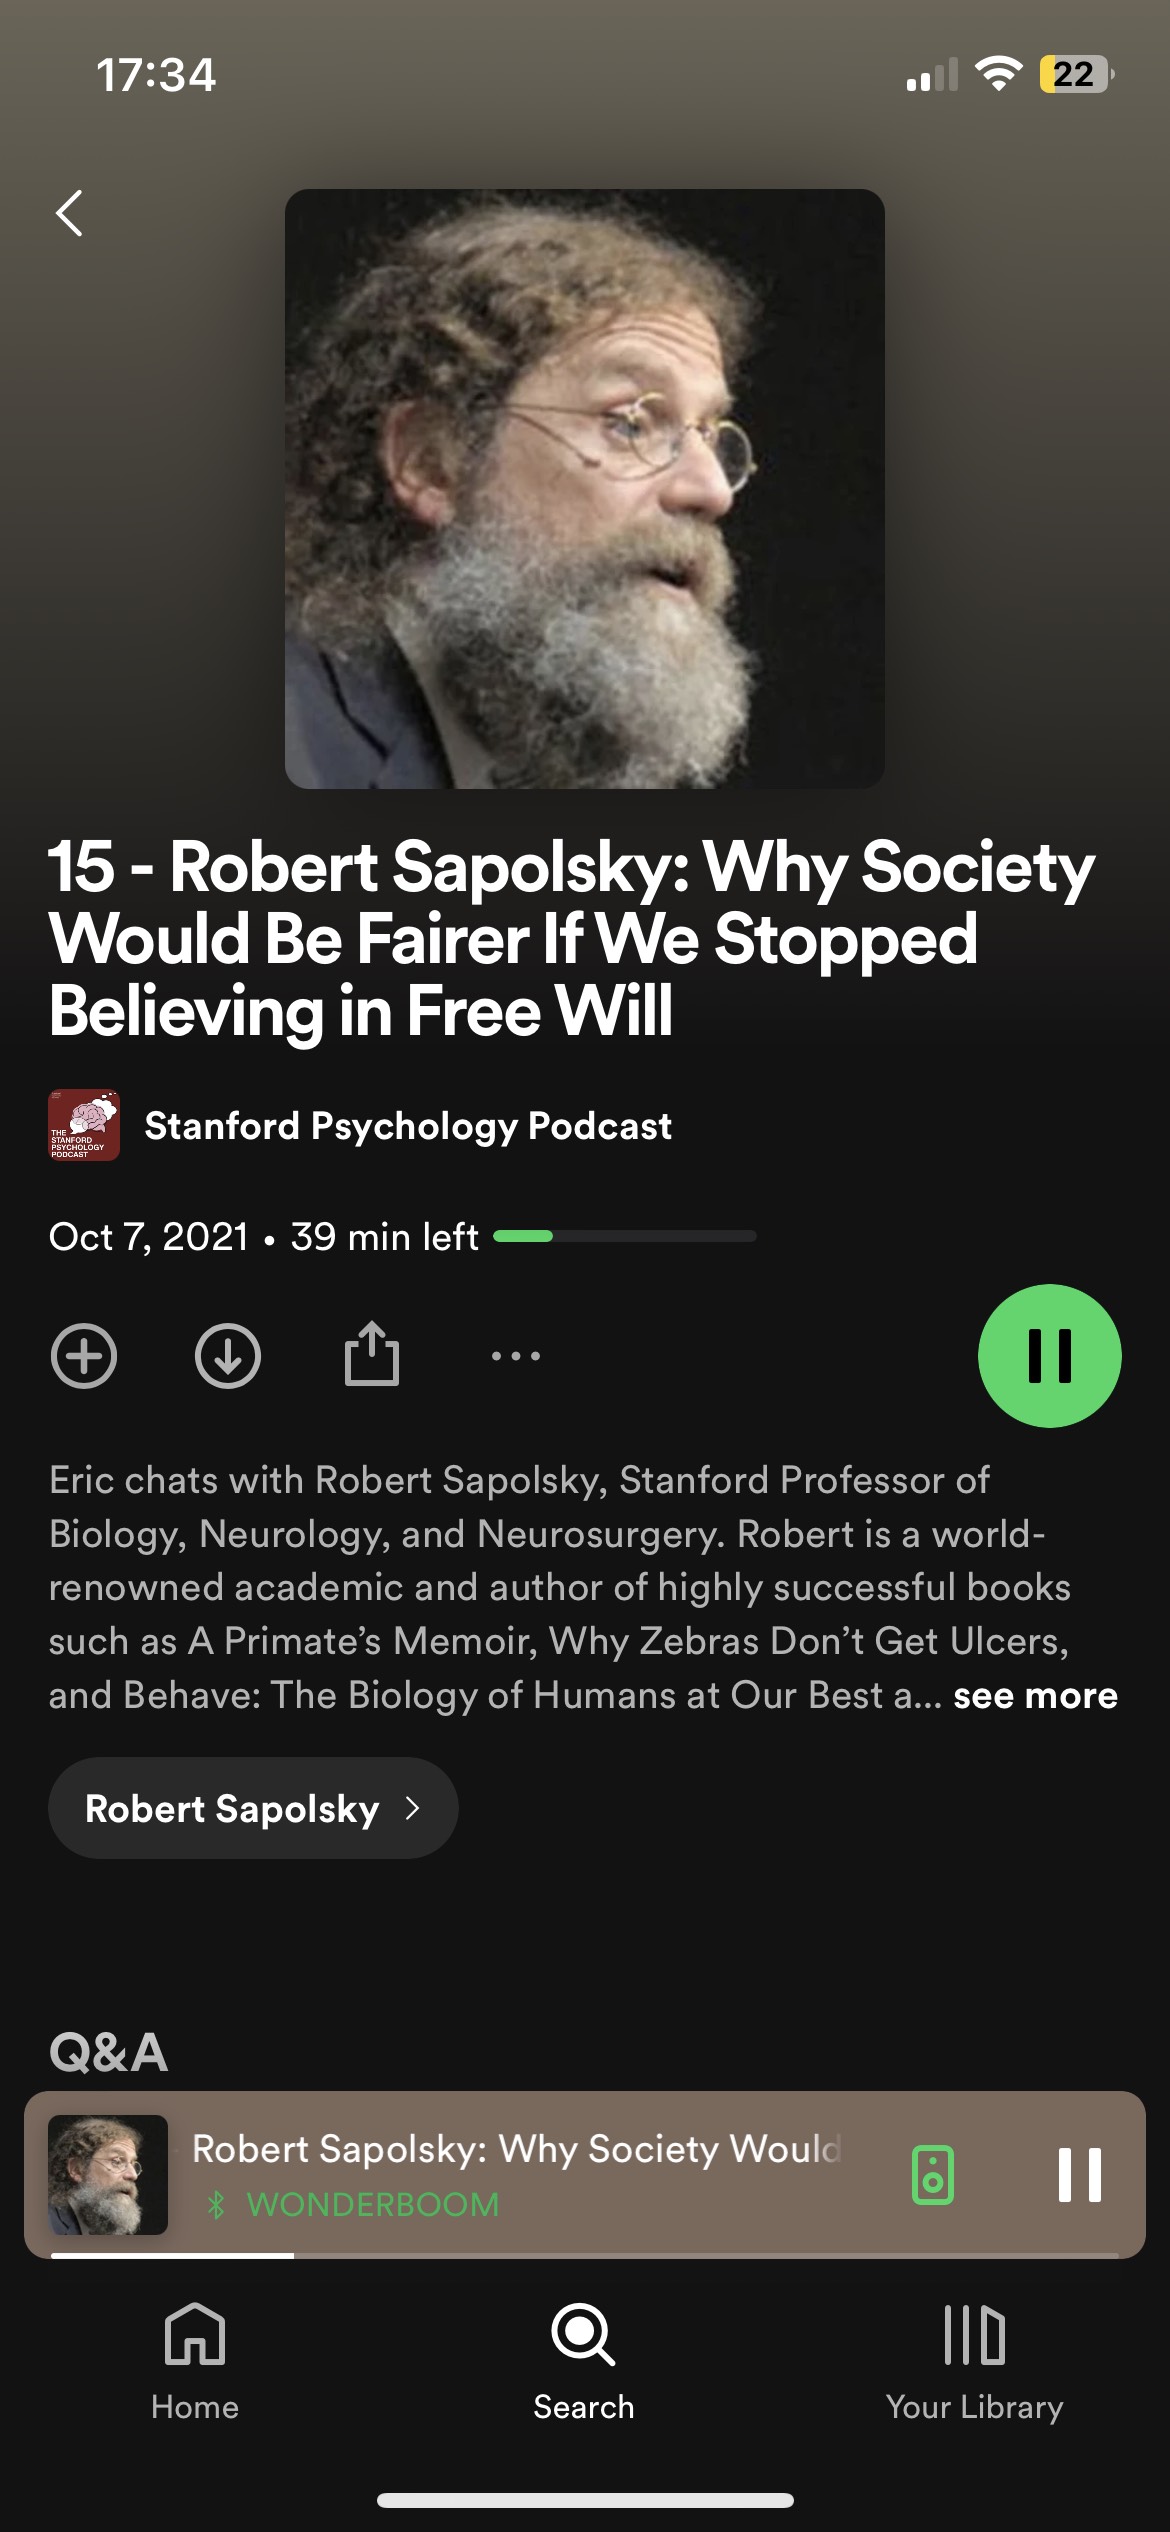 15- Robert Sapolsky: Why Society Would Be Fairer If We Stopped Believing in Free Will (Stanford Psychology Podcast) (46:53-47:31 especially…dying [and amen, bruh])